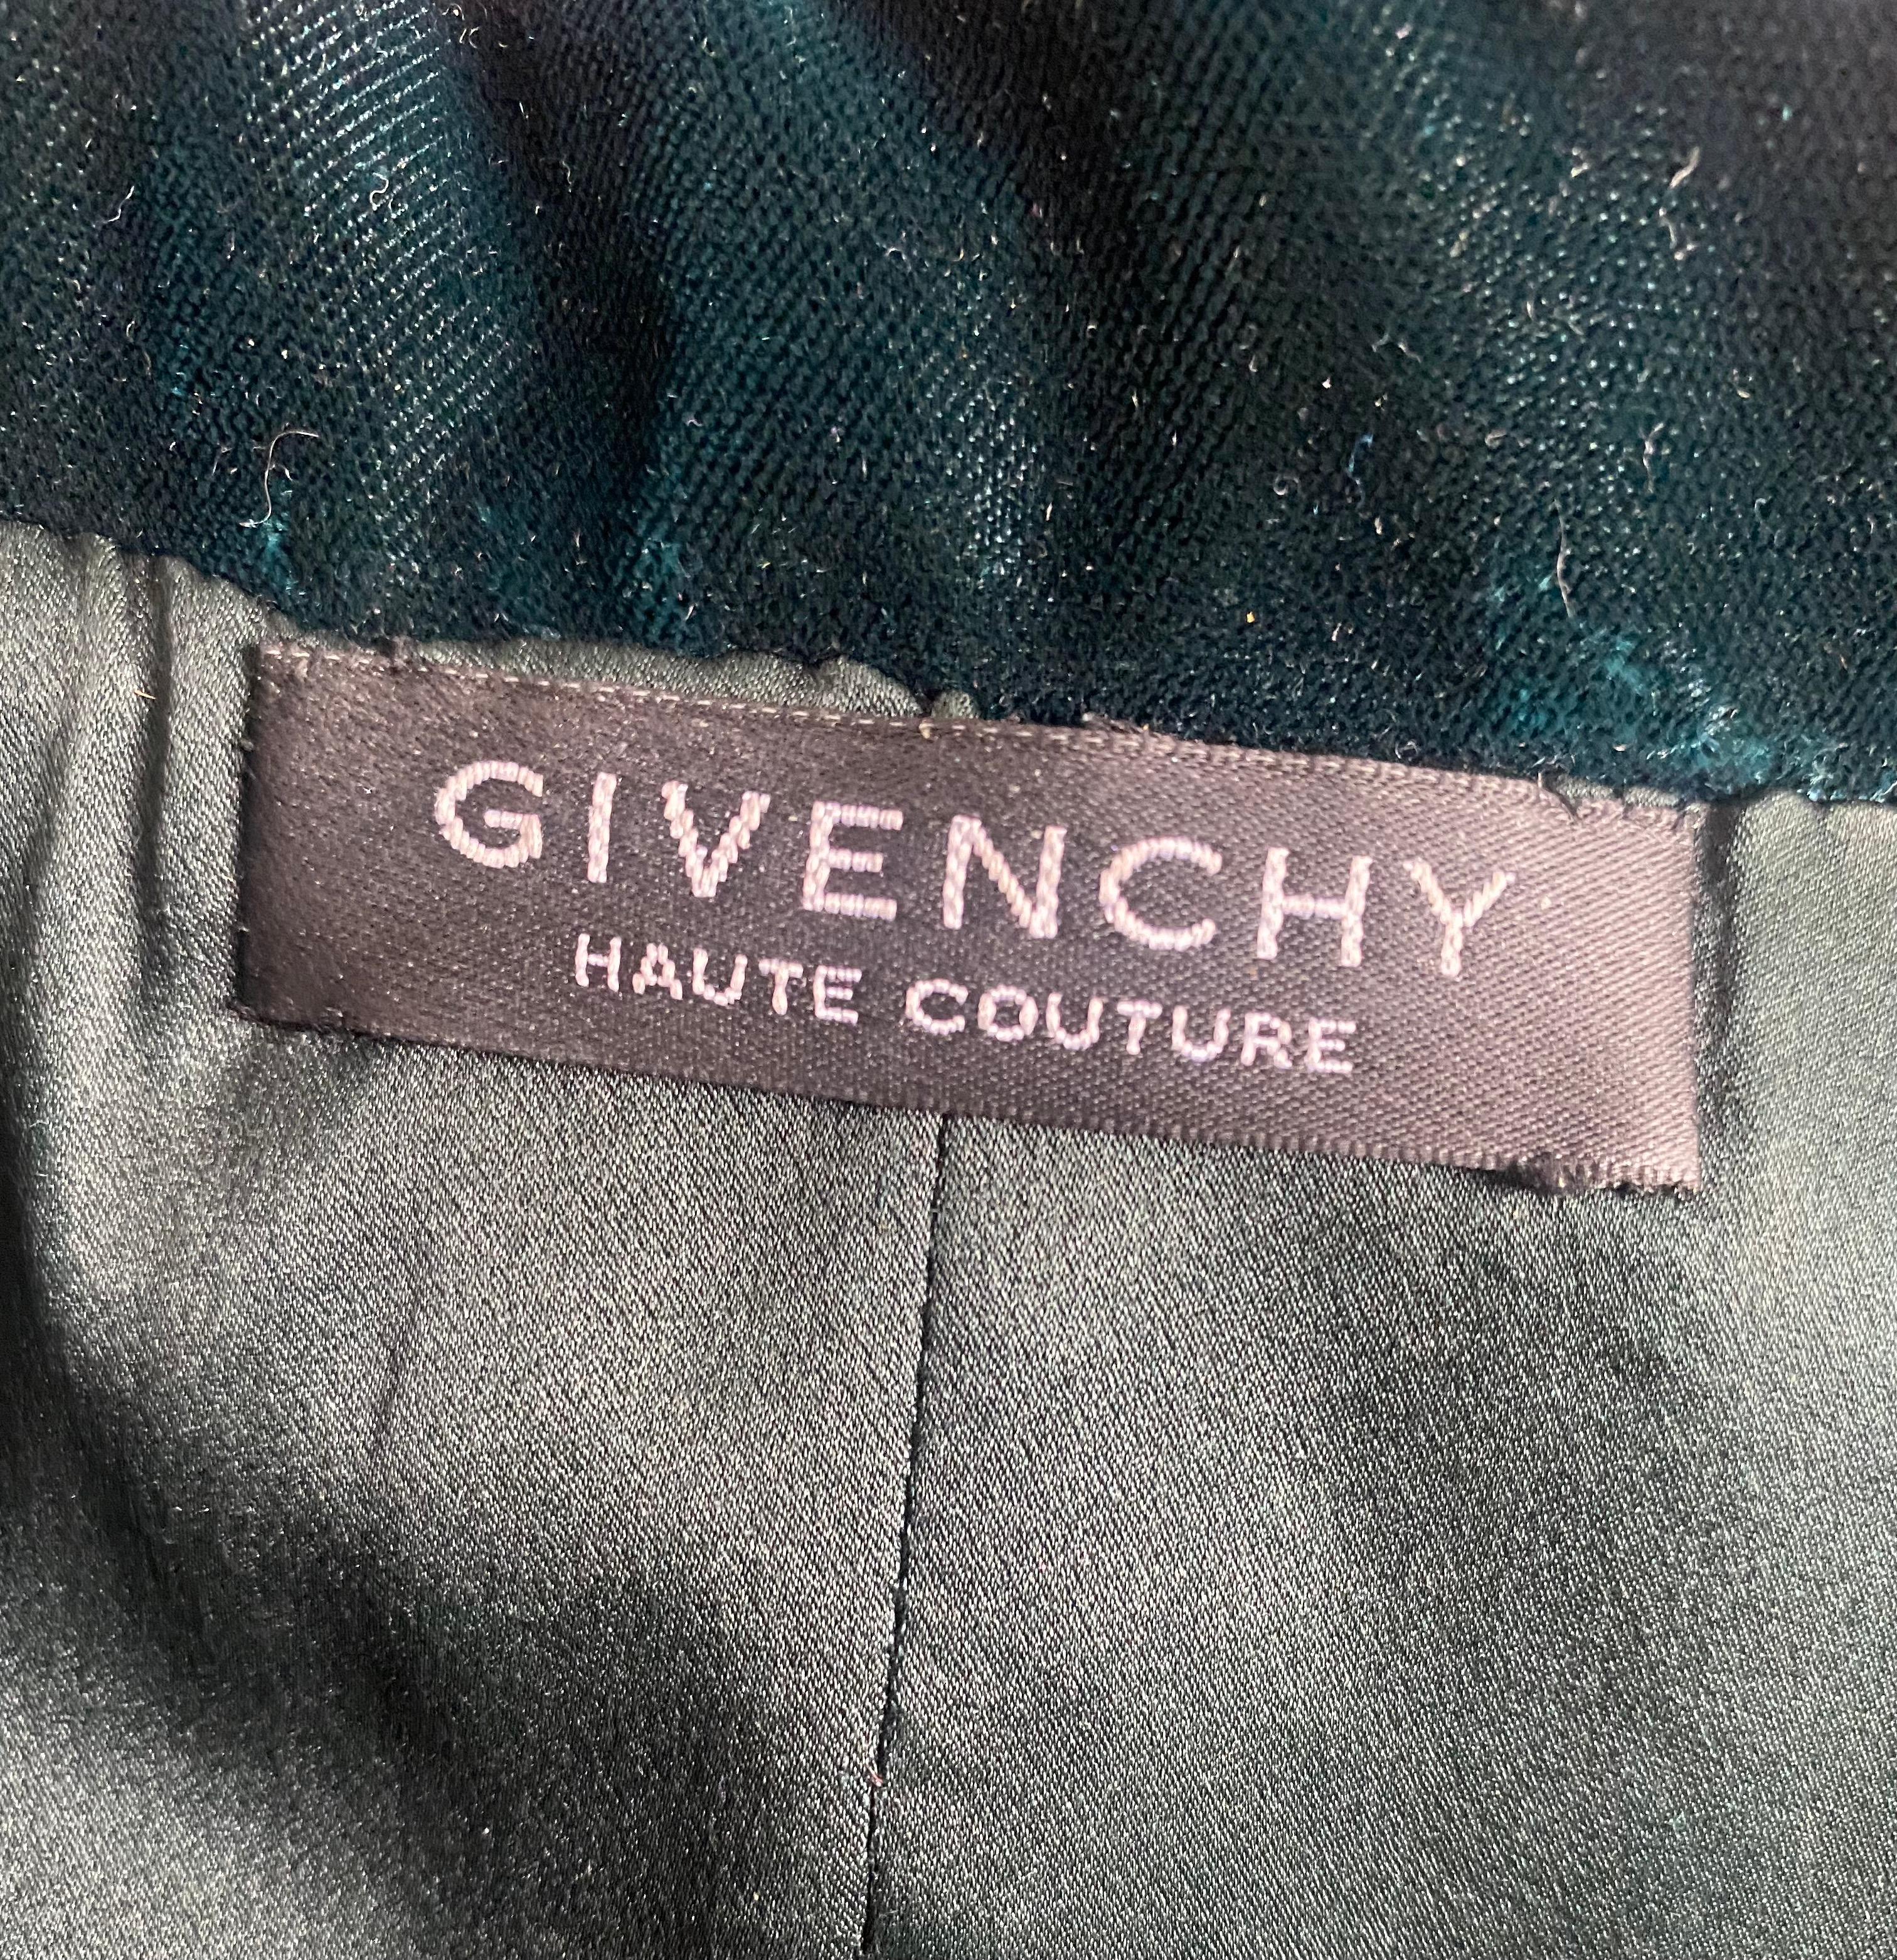 2003 Givenchy Fall Haute Couture Green Velvet Skirt Suit In Excellent Condition For Sale In London, GB